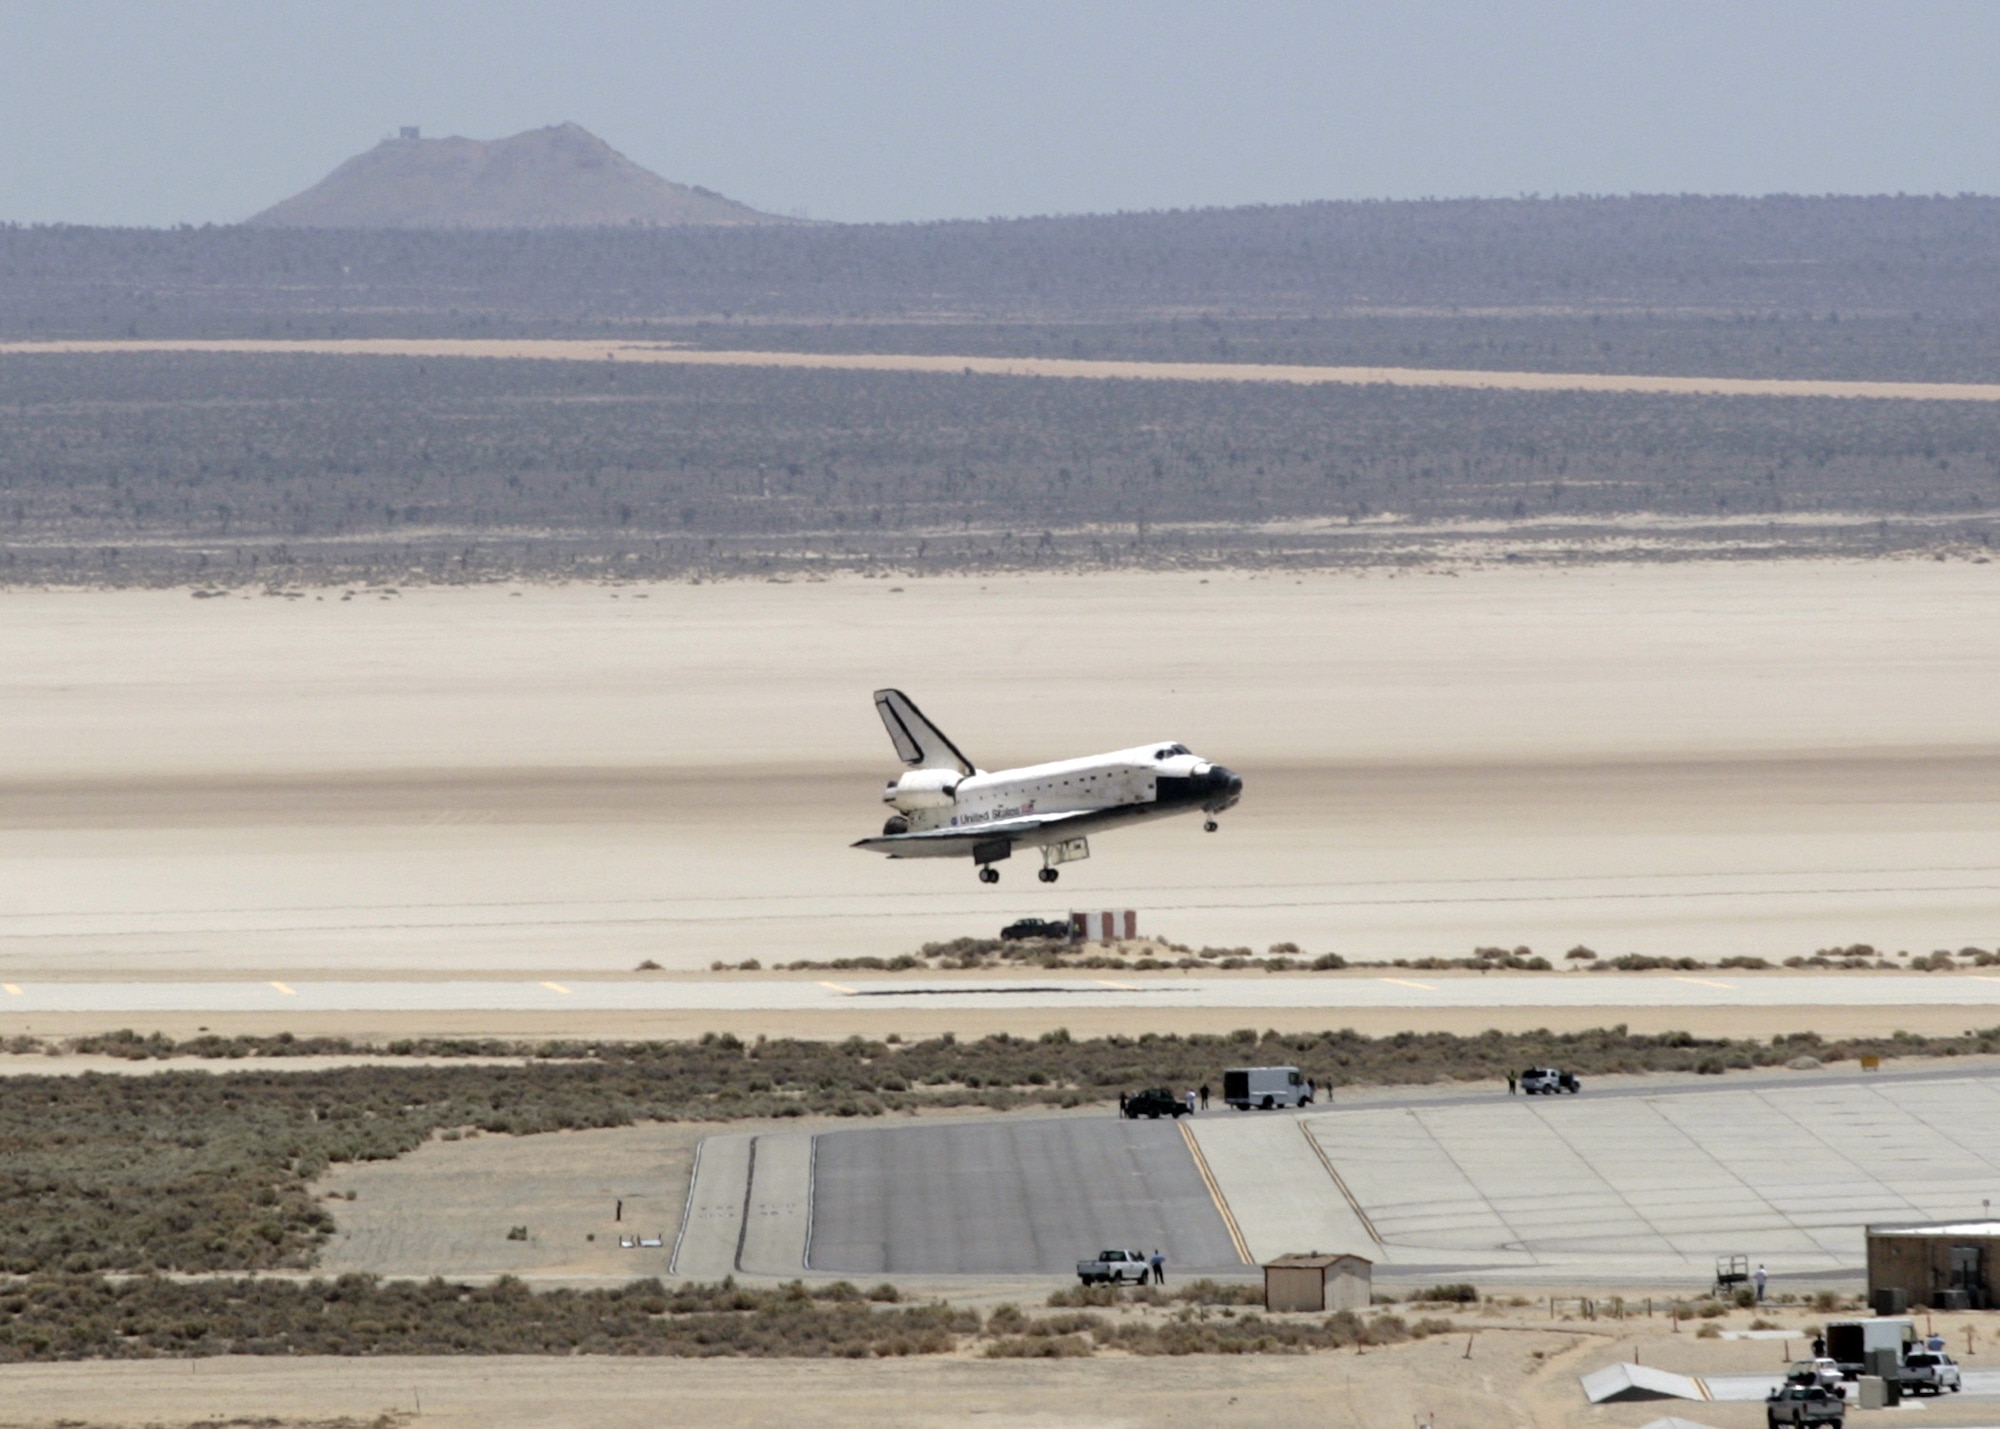 Space Shuttle Atlantis, STS-117, performs a successful landing at Edwards Air Force Base, Calif., on June 22.  The shuttle started its mission June 8 to perform maintenance on the International Space Station.  STS-117 was the 21st mission to the space station and the 118th shuttle mission overall.  The Atlantis landing marks Edwards' 51st shuttle landing. The next shuttle mission is scheduled to launch in August.  (U.S. Air Force photo/Steve Zapka)